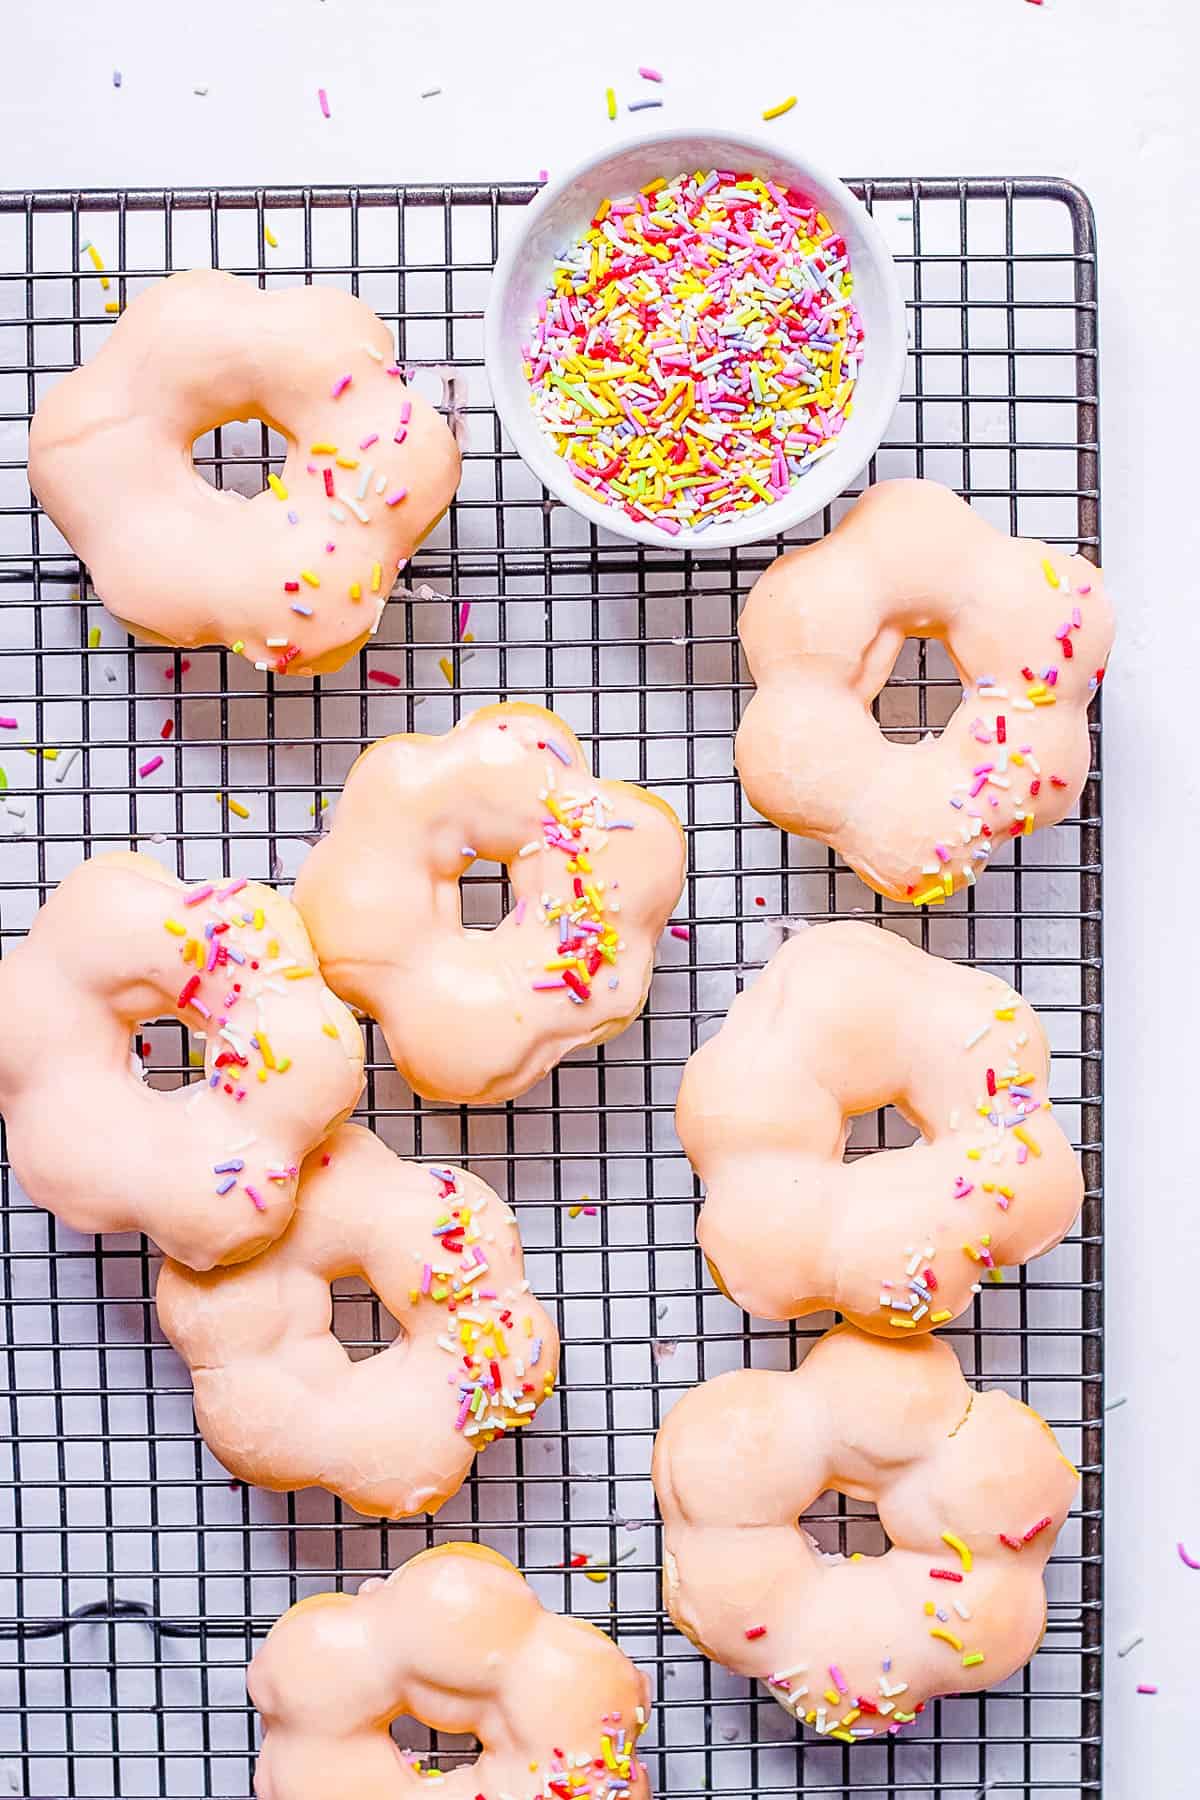 Baked mochi donuts with vegan glaze and sprinkles on a wire rack.